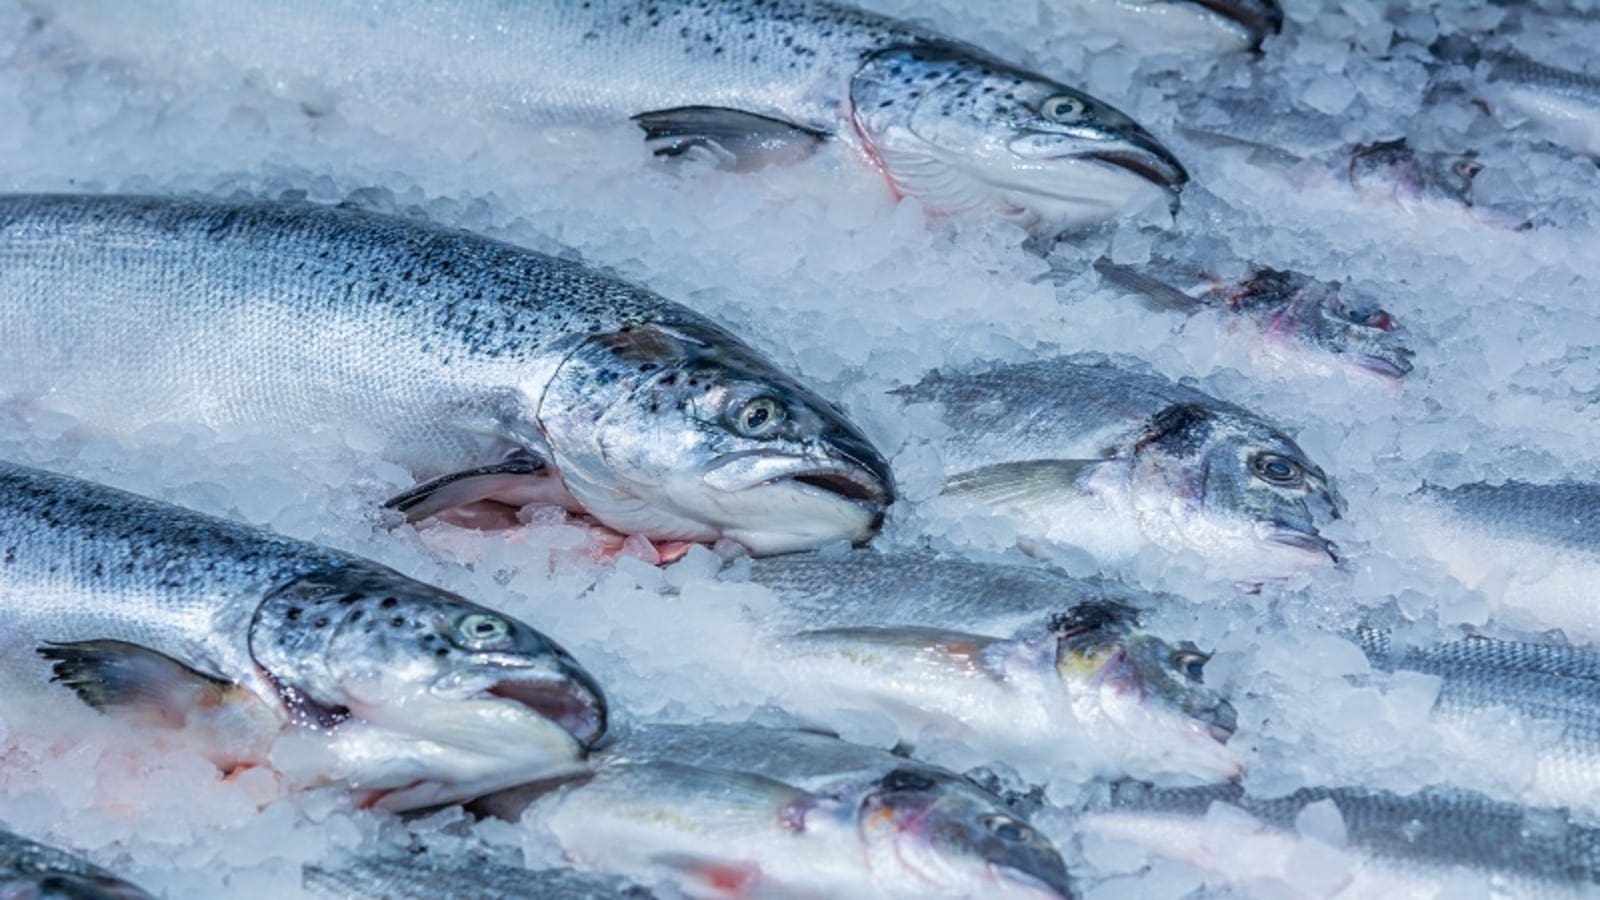 US FDA embarks on pilot program to enhance safety of imported seafood